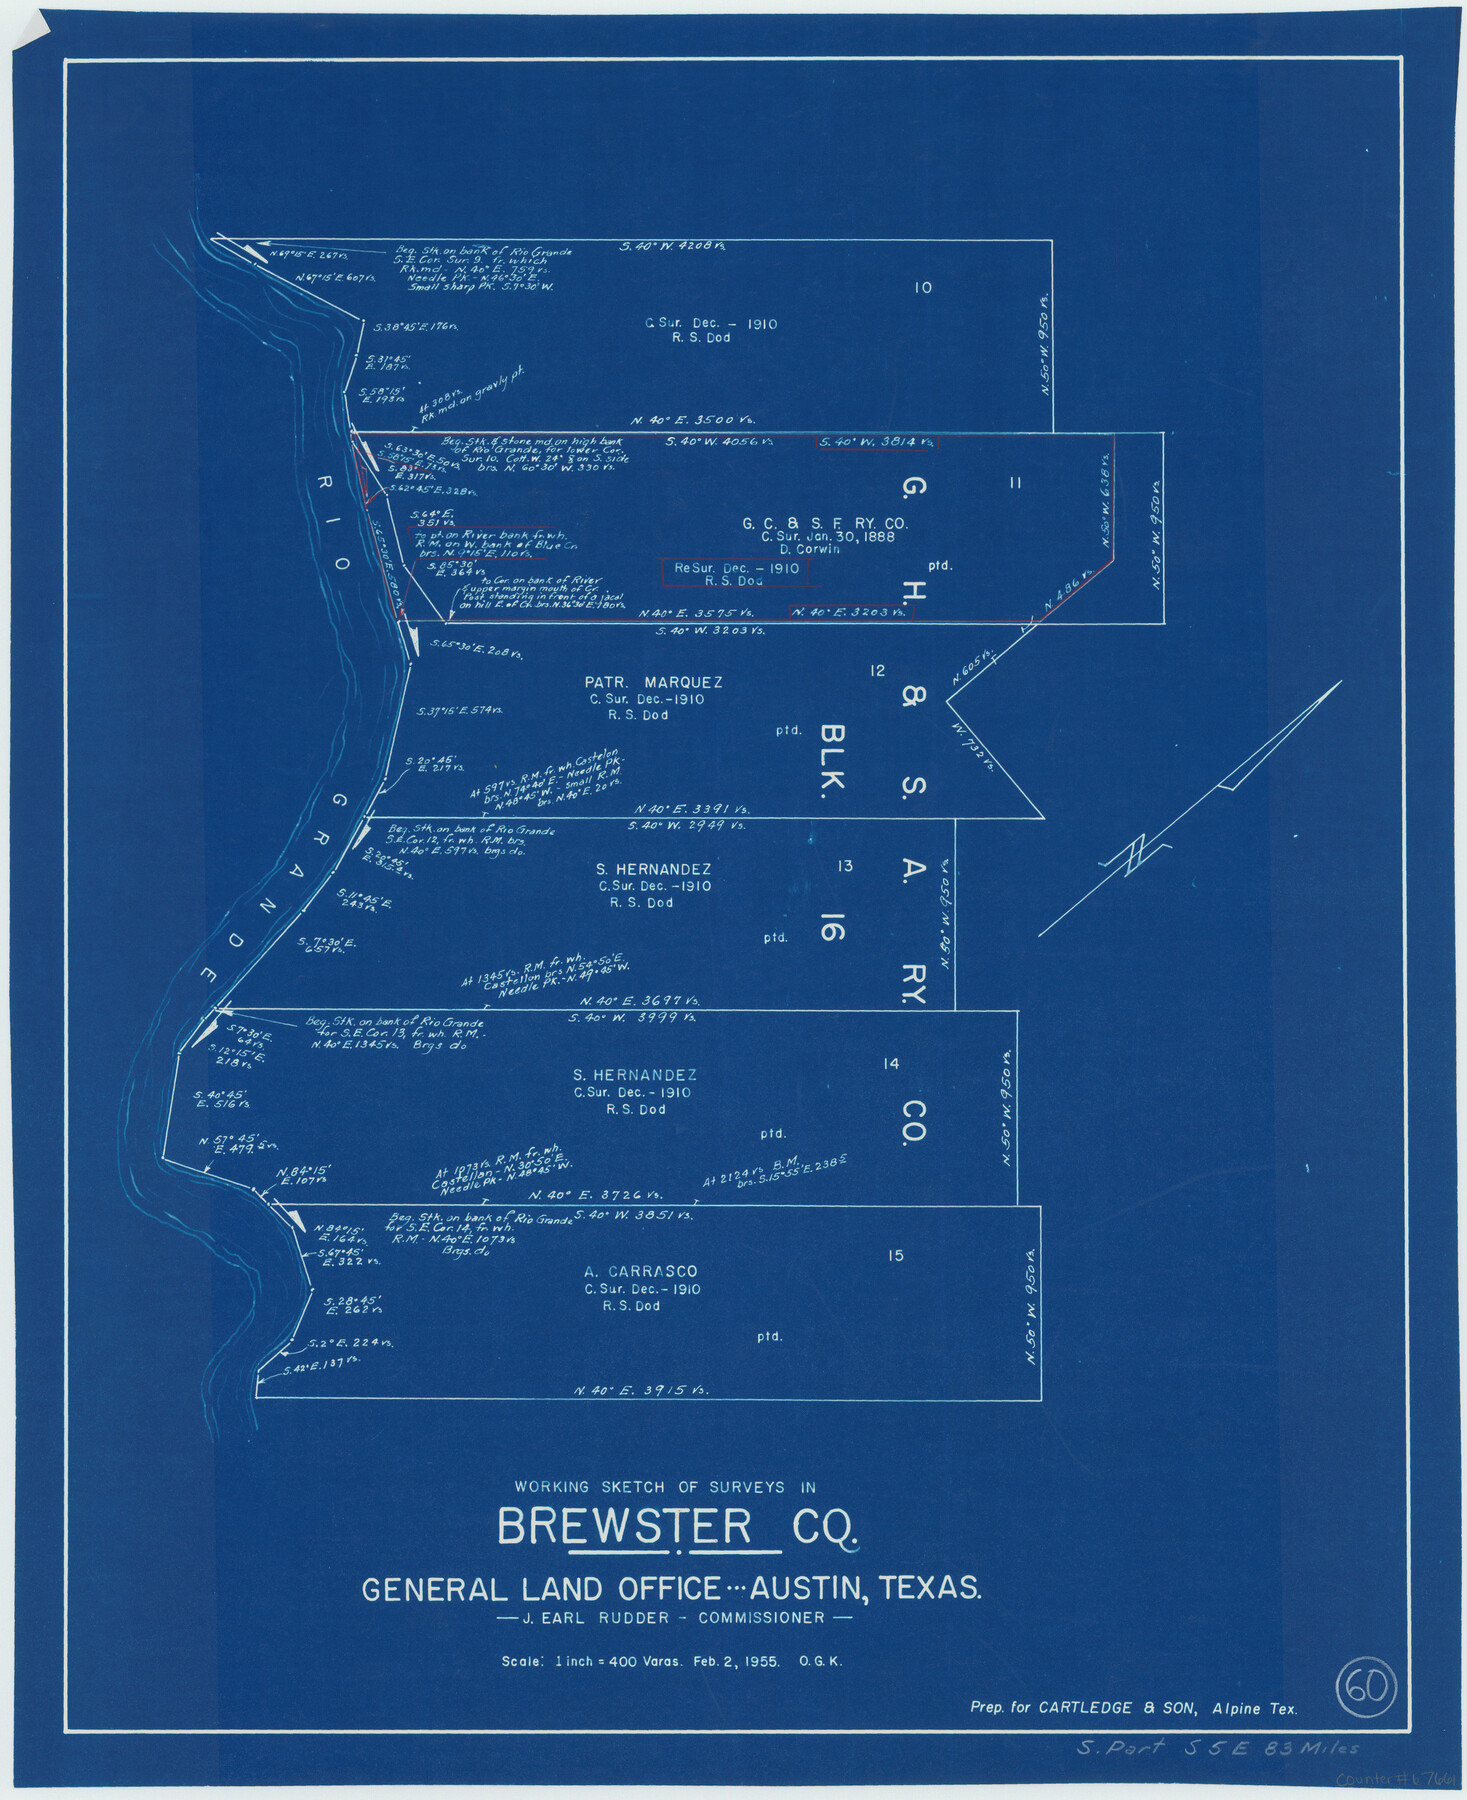 67661, Brewster County Working Sketch 60, General Map Collection